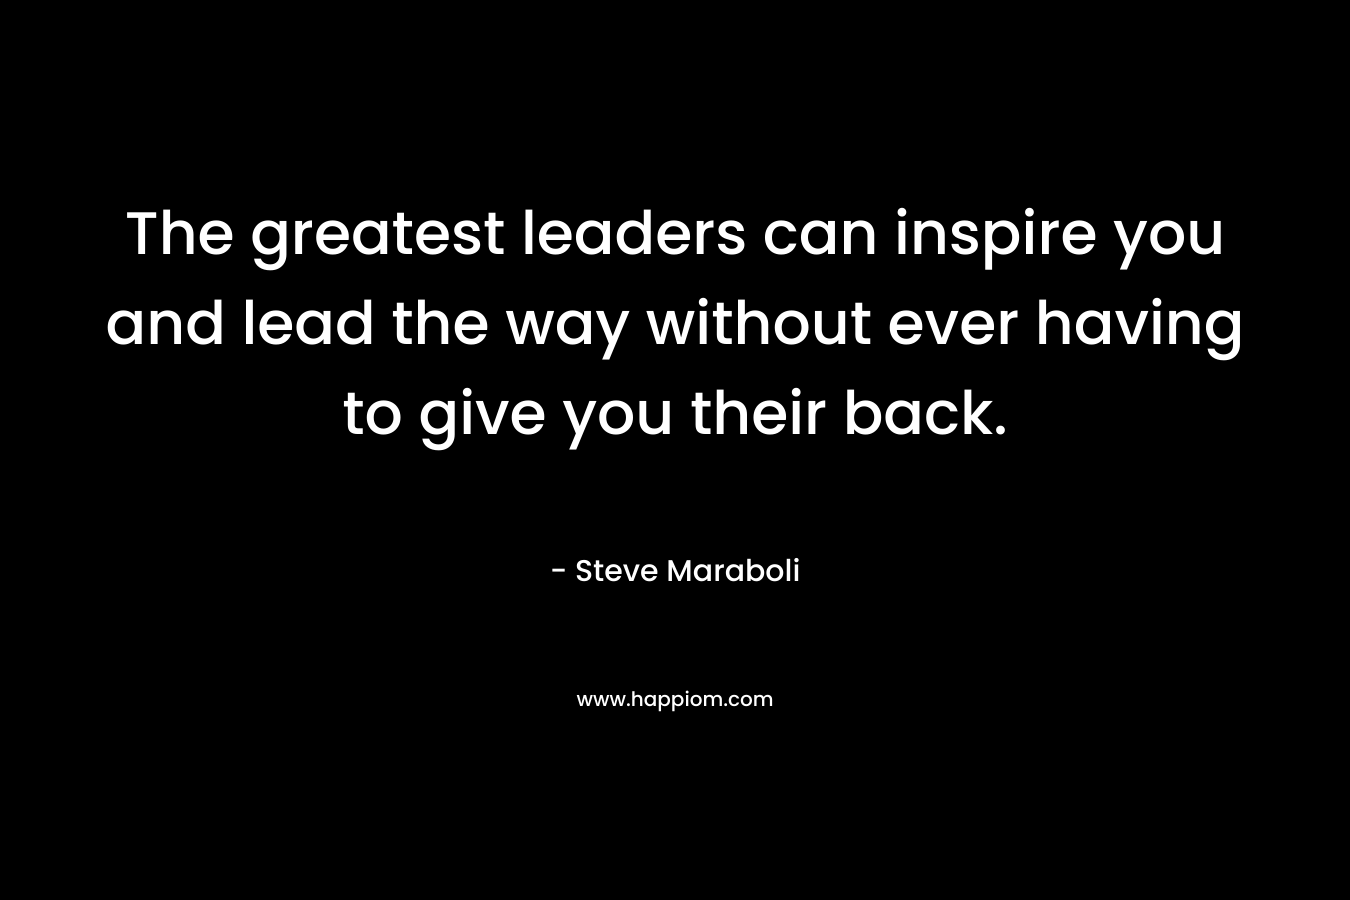 The greatest leaders can inspire you and lead the way without ever having to give you their back.